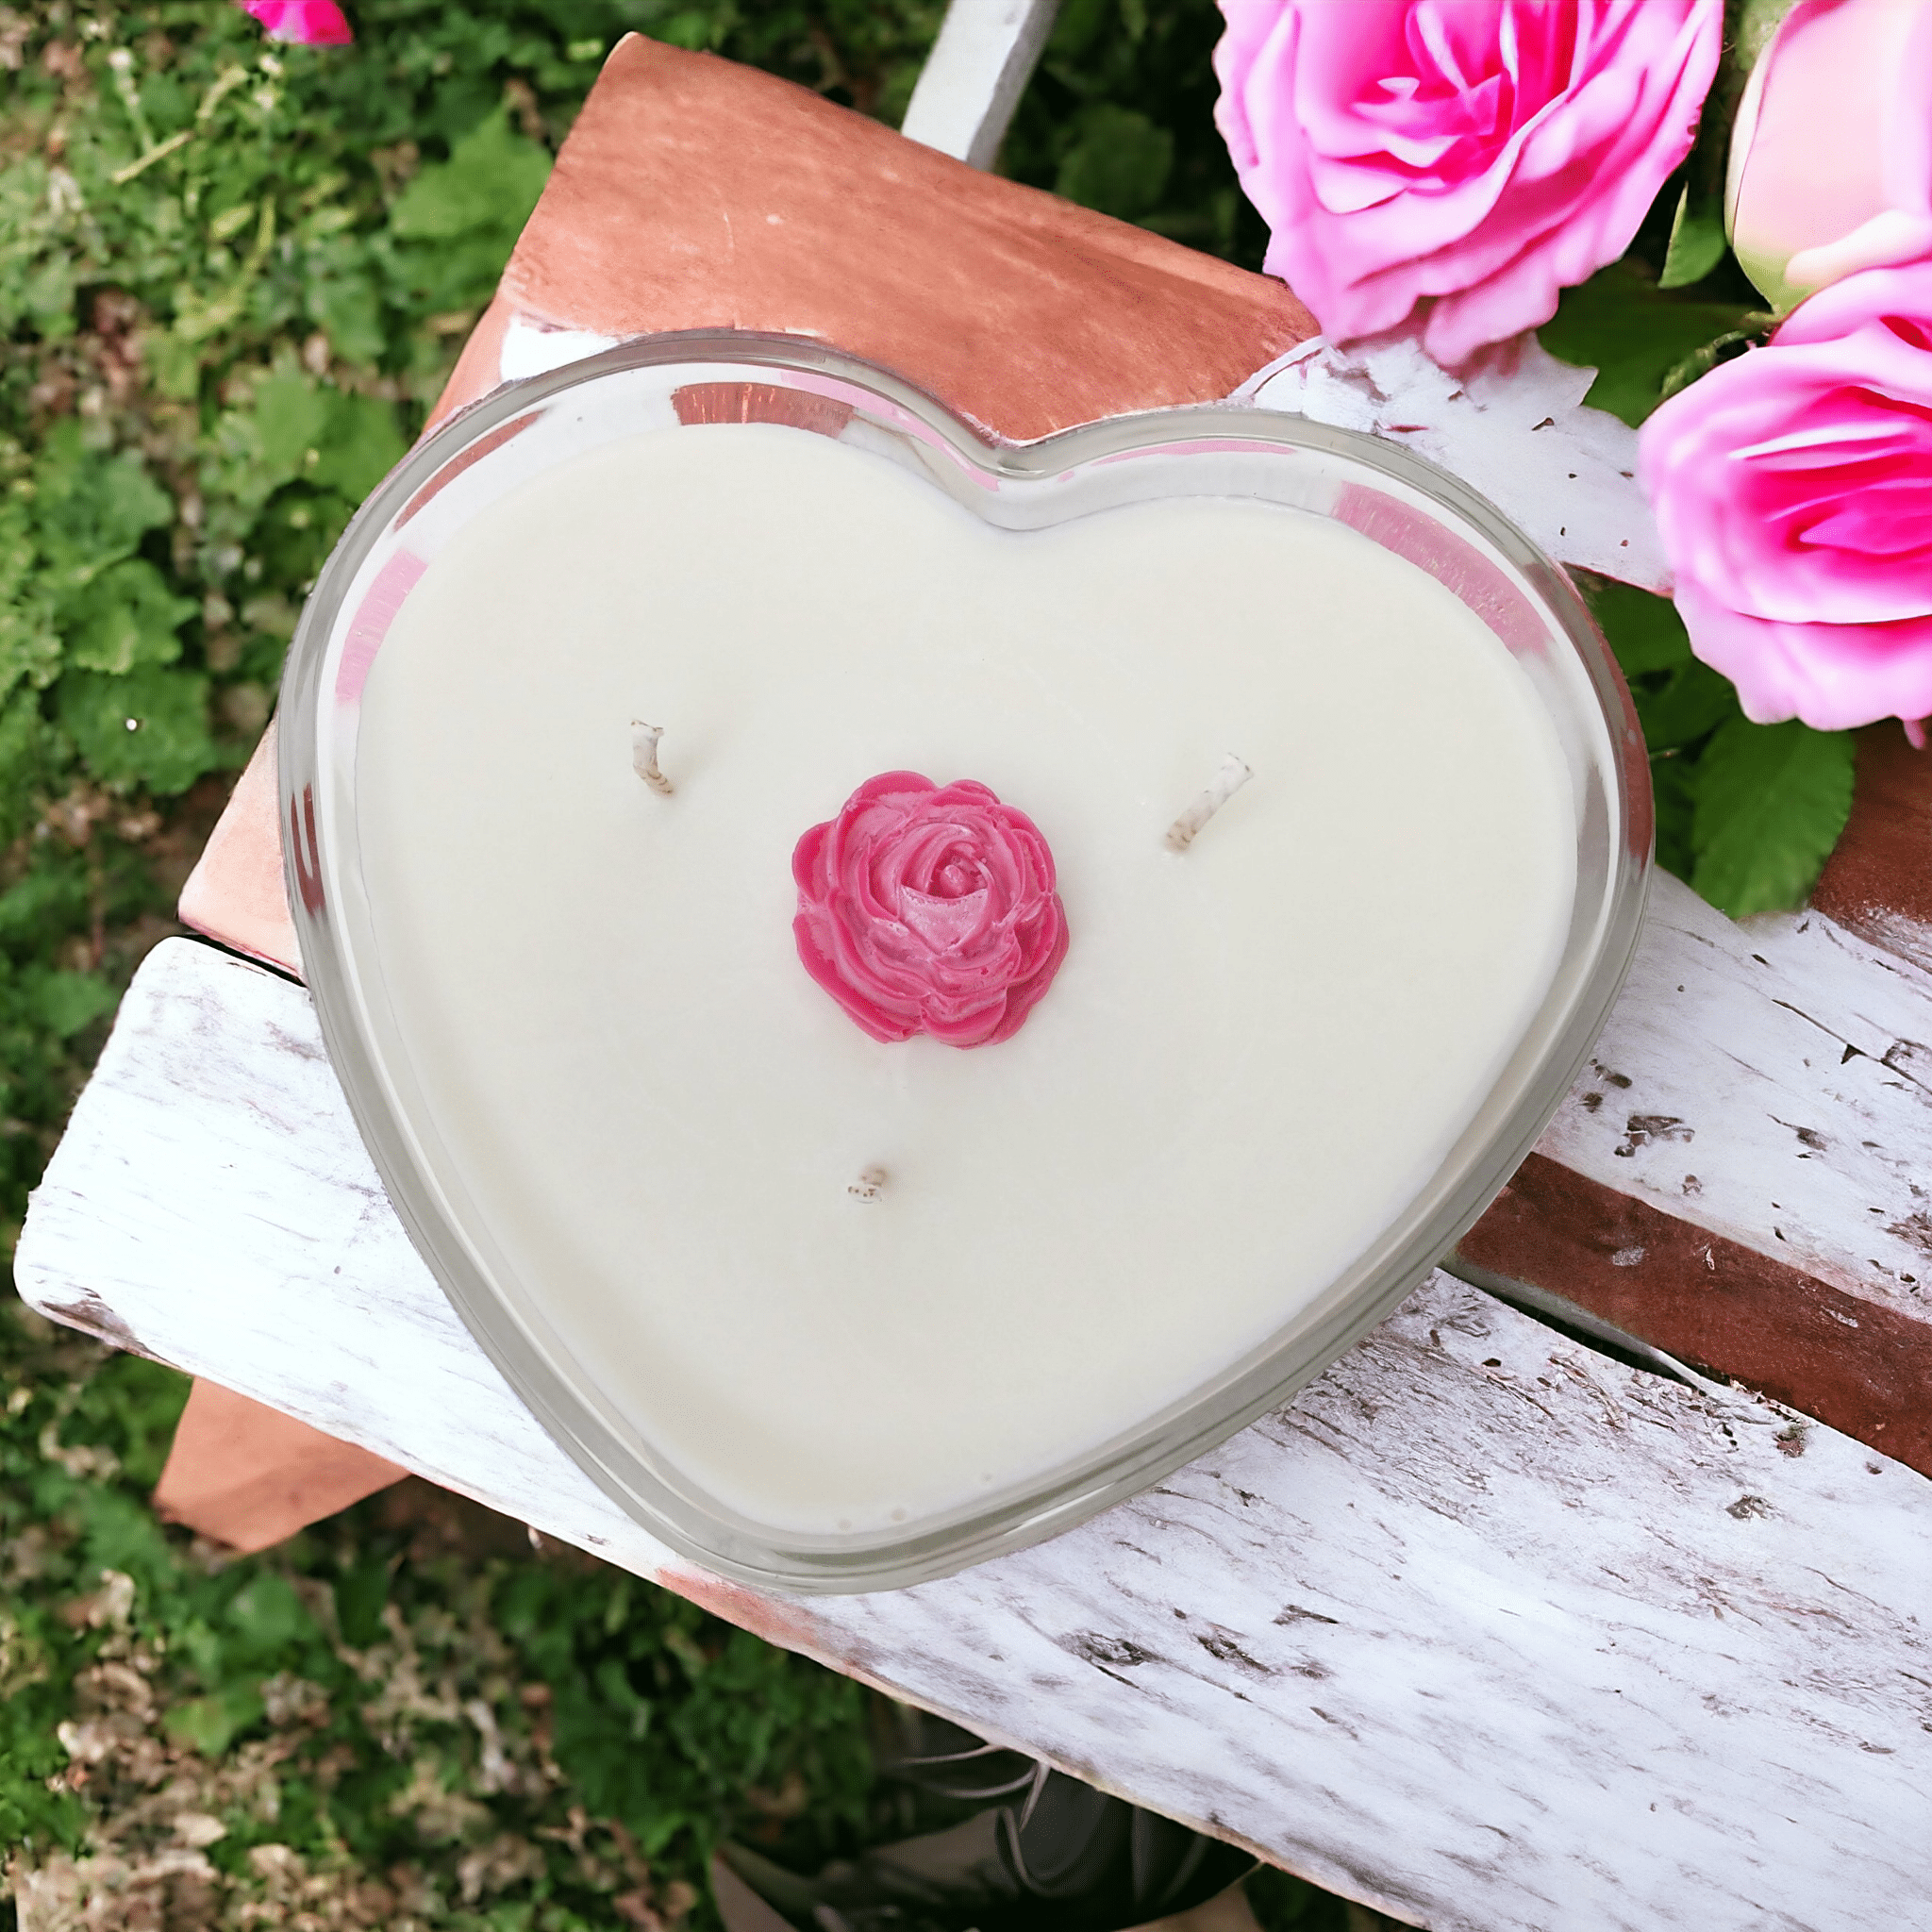 Valentine's day, Heart shaped Cube candle, Pillar candle, Soy candle